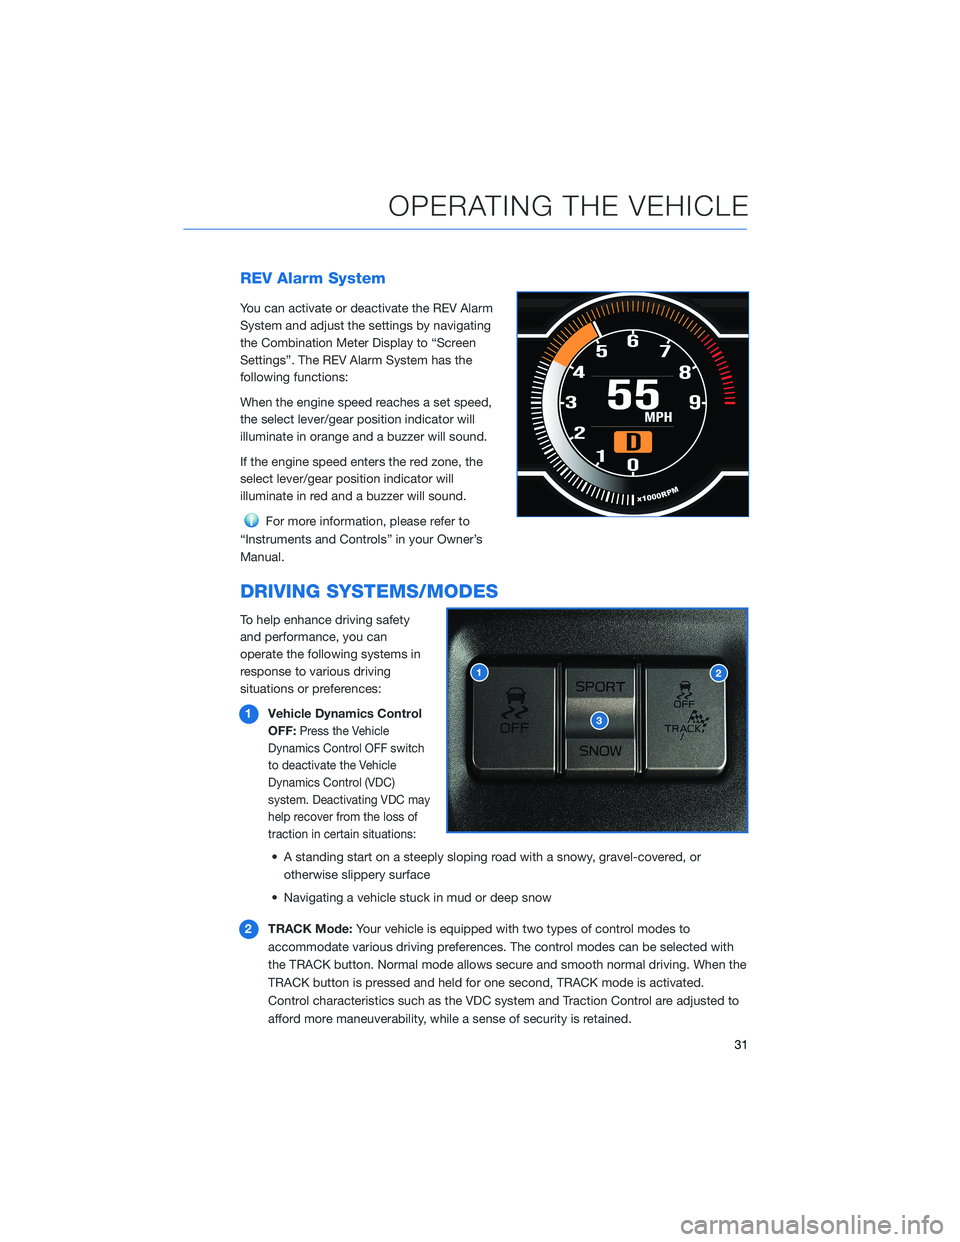 SUBARU BRZ 2022  Getting Started Guide REV Alarm System
You can activate or deactivate the REV Alarm
System and adjust the settings by navigating
the Combination Meter Display to “Screen
Settings”. The REV Alarm System has the
followin